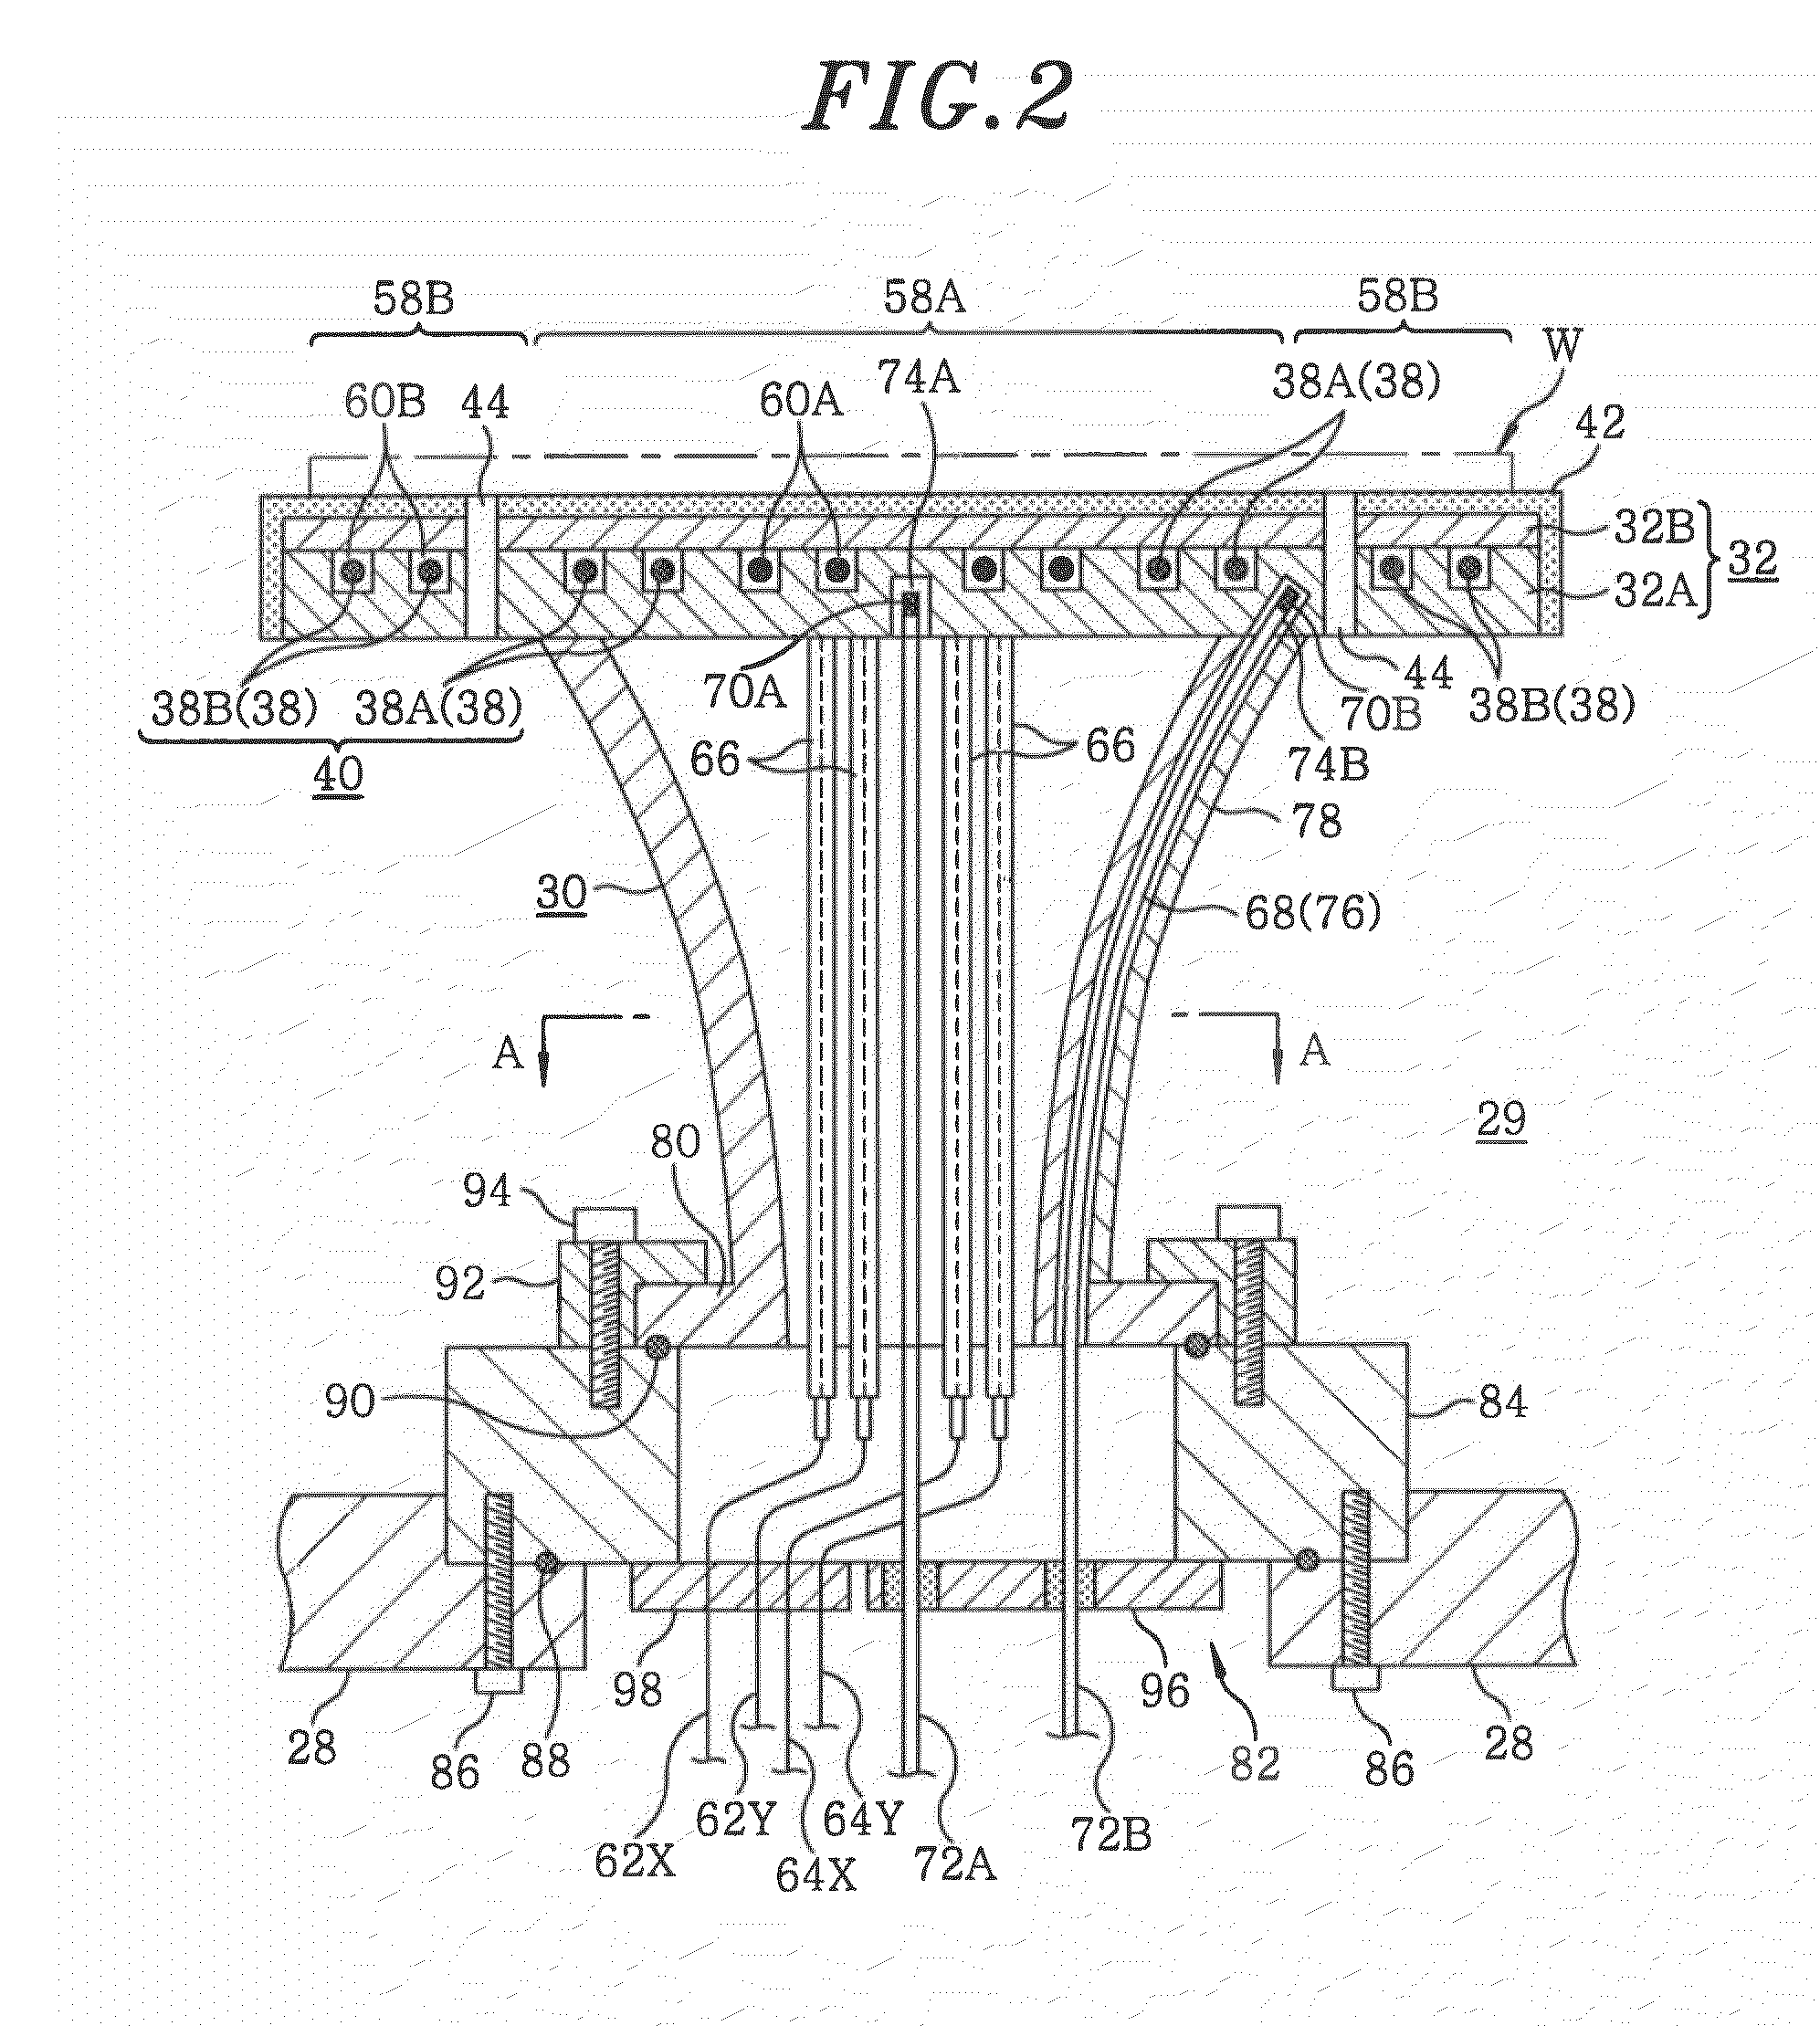 Mounting table structure and heat treatment apparatus